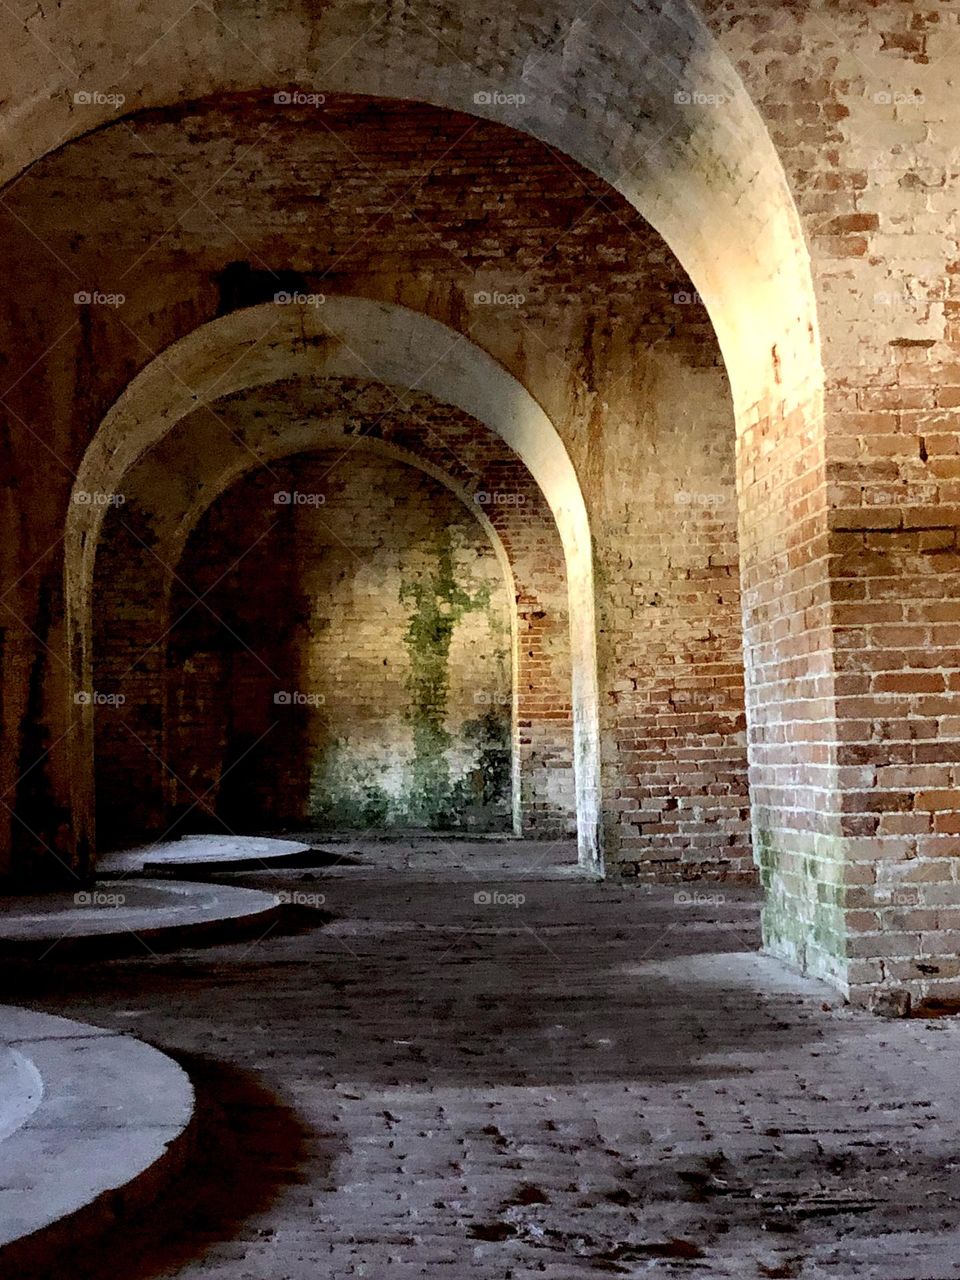 View into old fortress. The brick arches continue into the shadows.